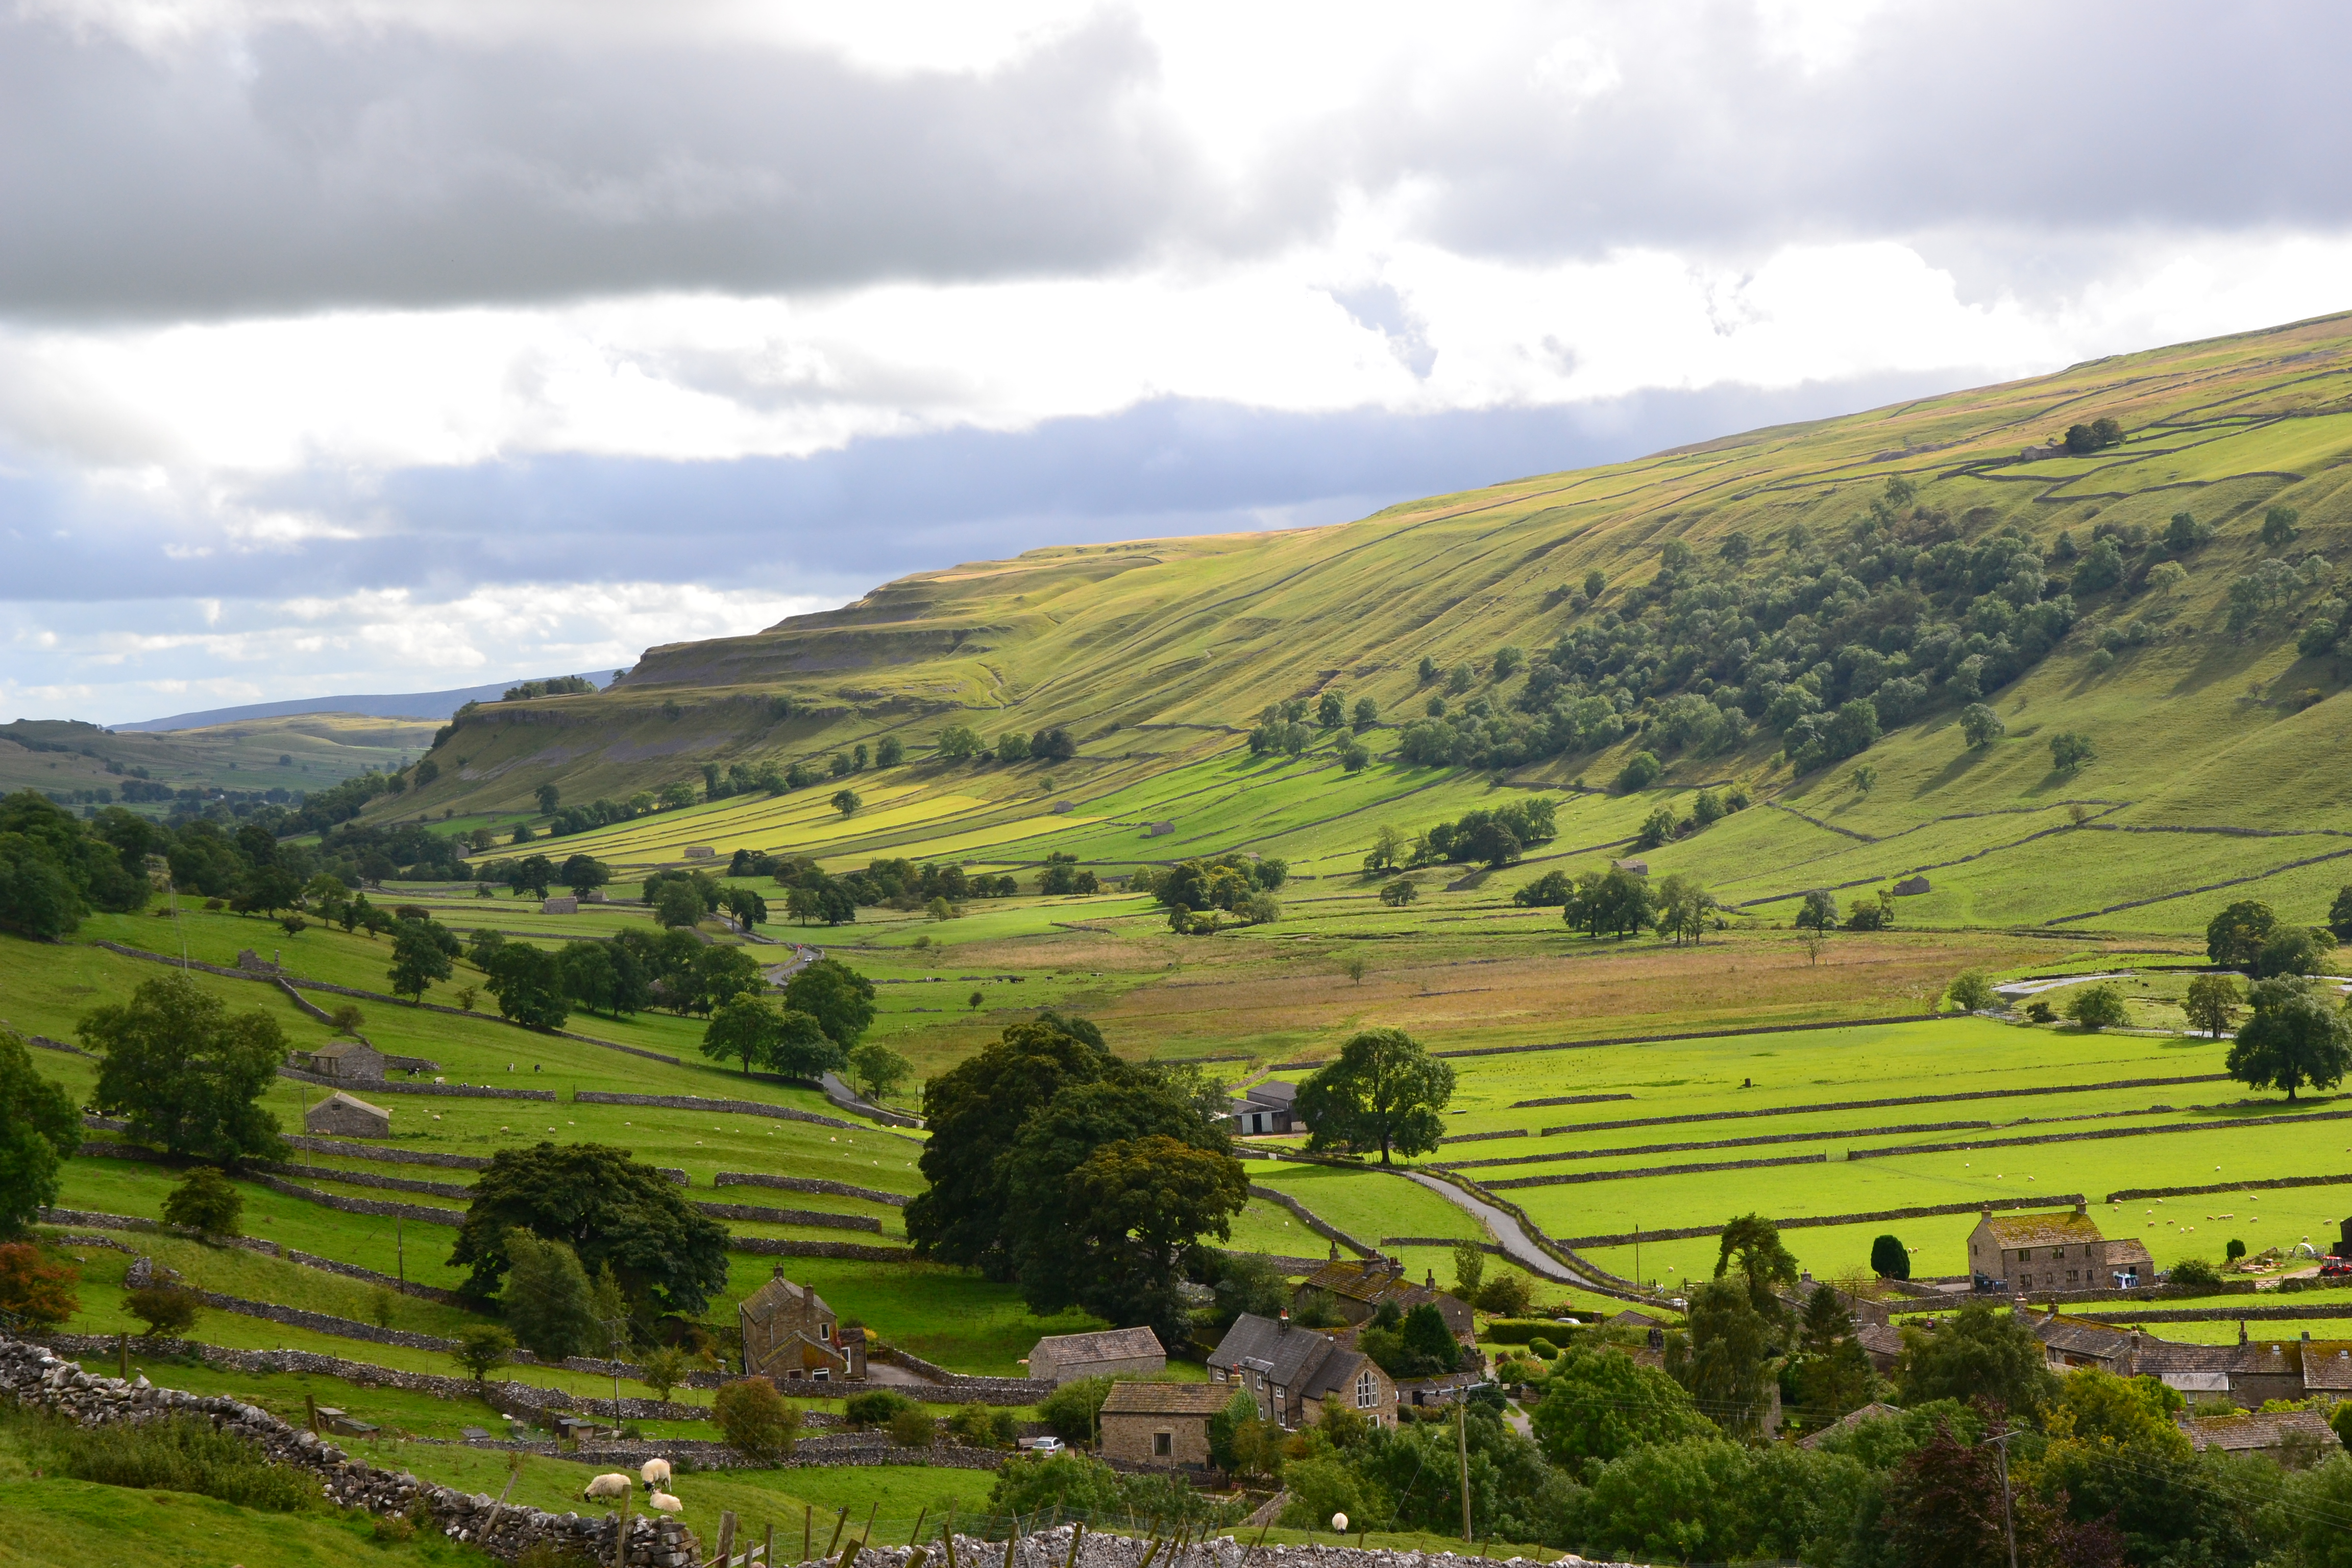 Scenery of The Yorkshire Dales